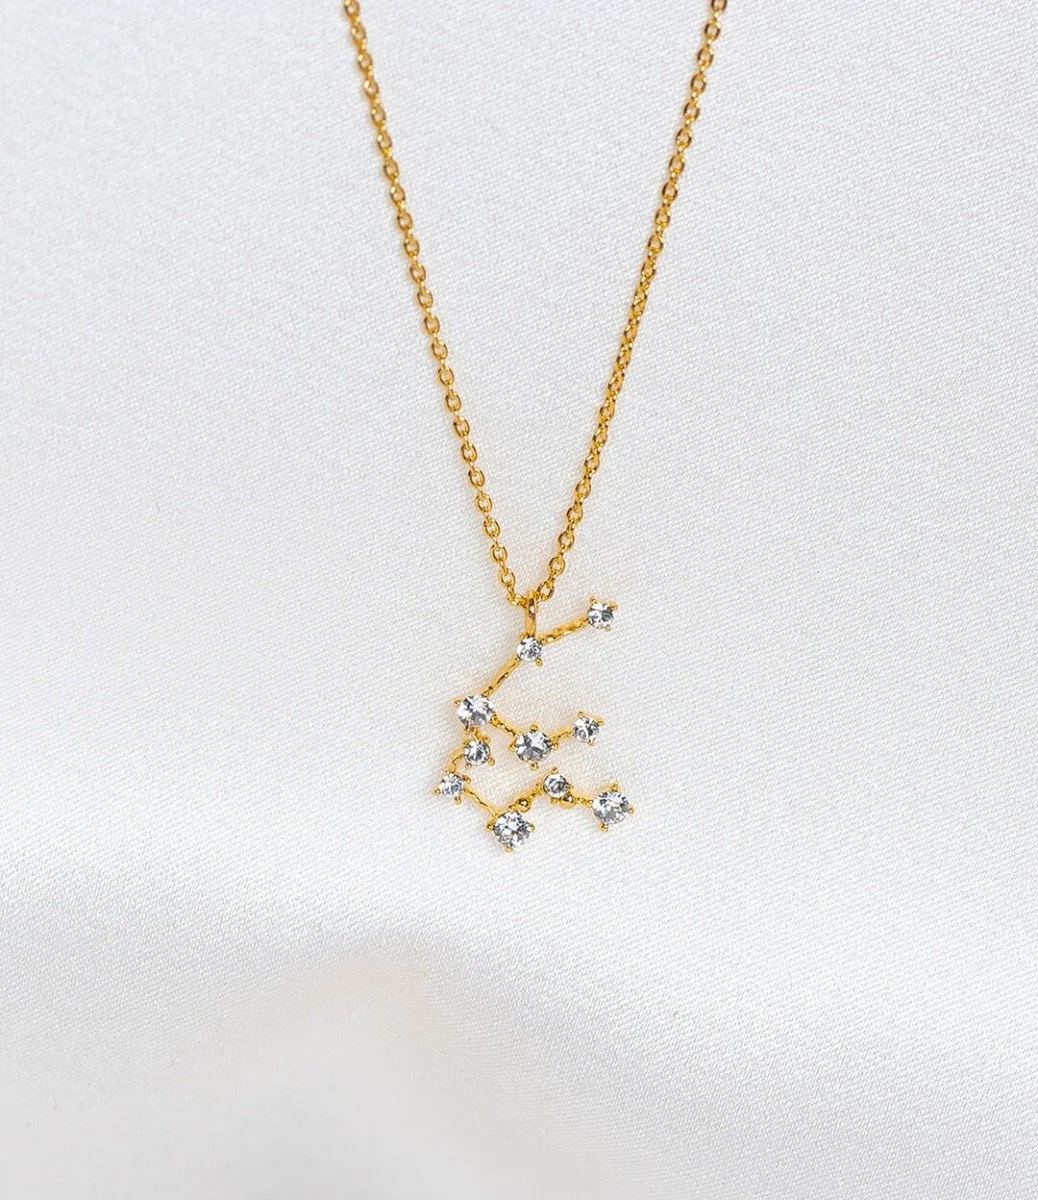 Aquarius Star Sign Necklace - Gold By Lily & Rose